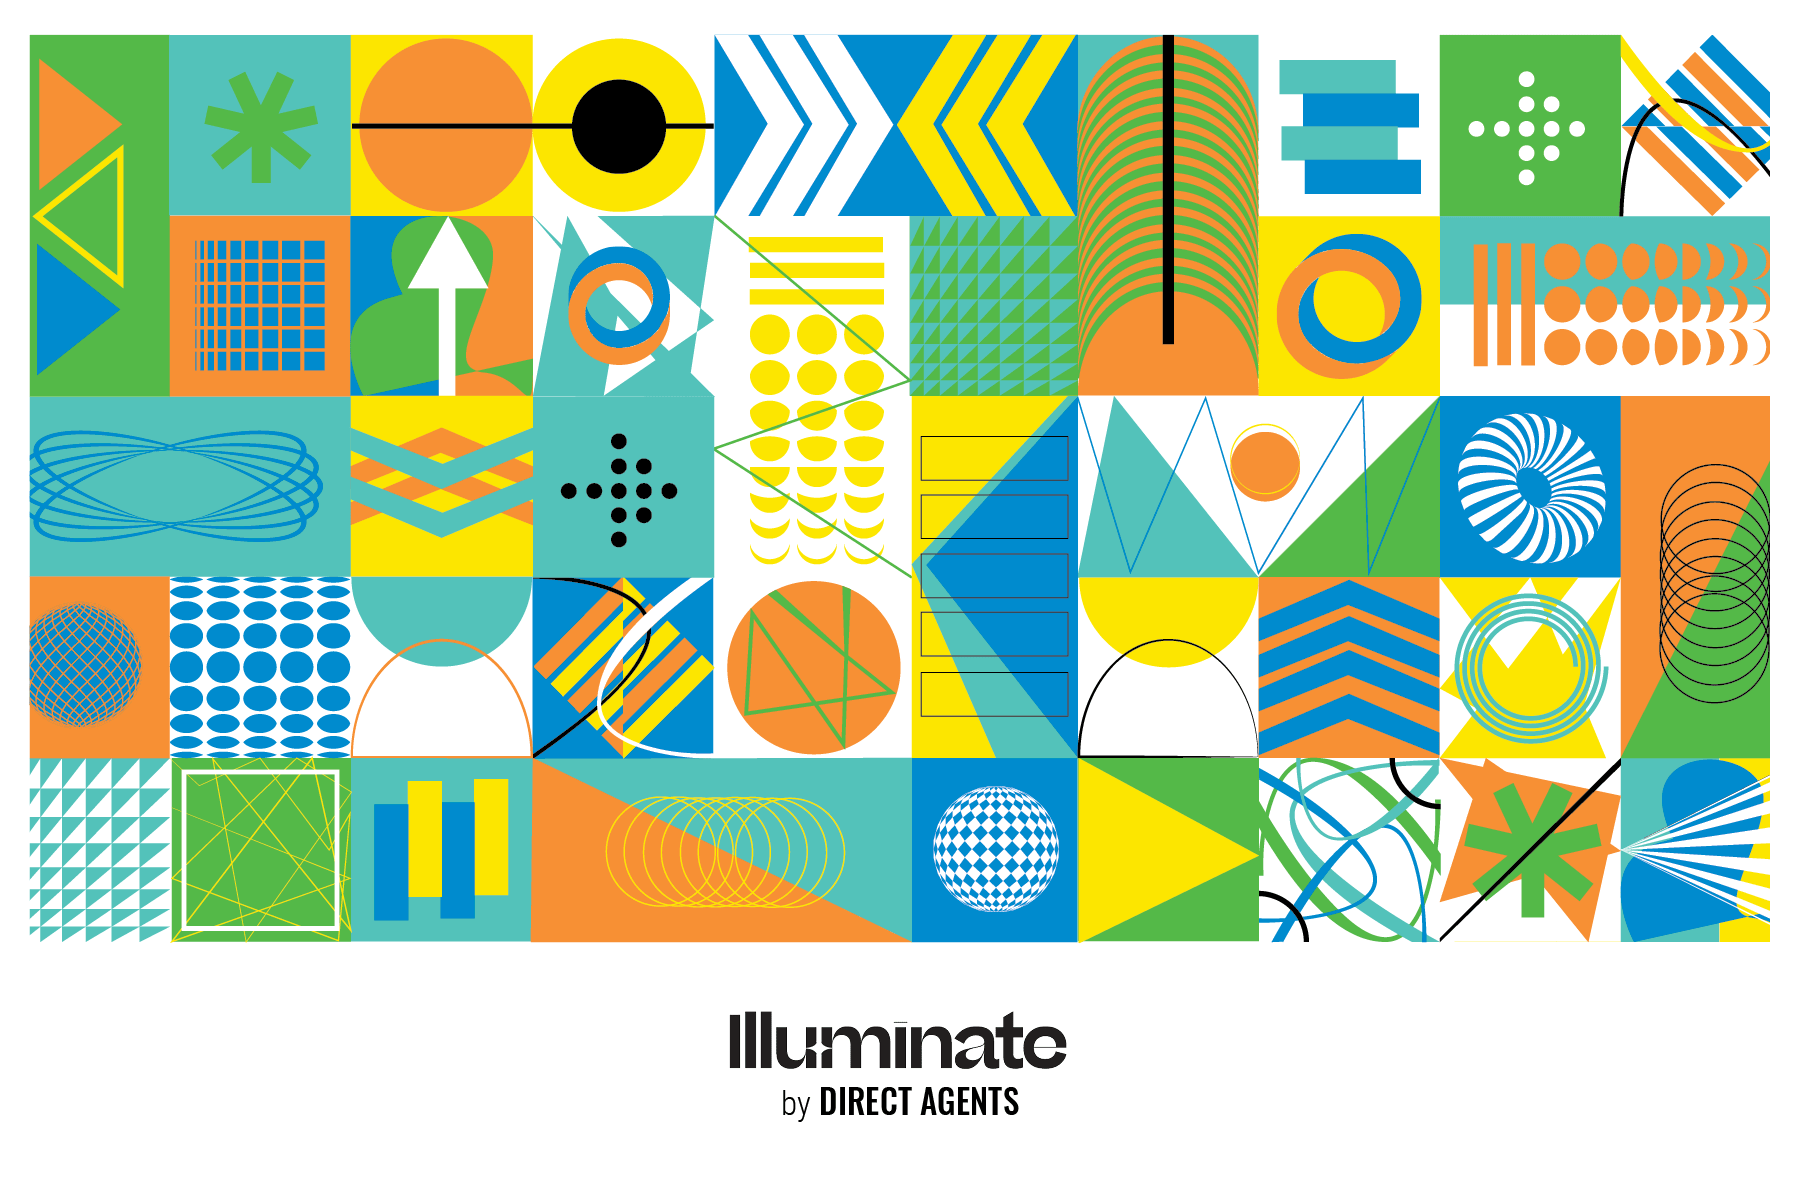 Illuminate by Direct Agents